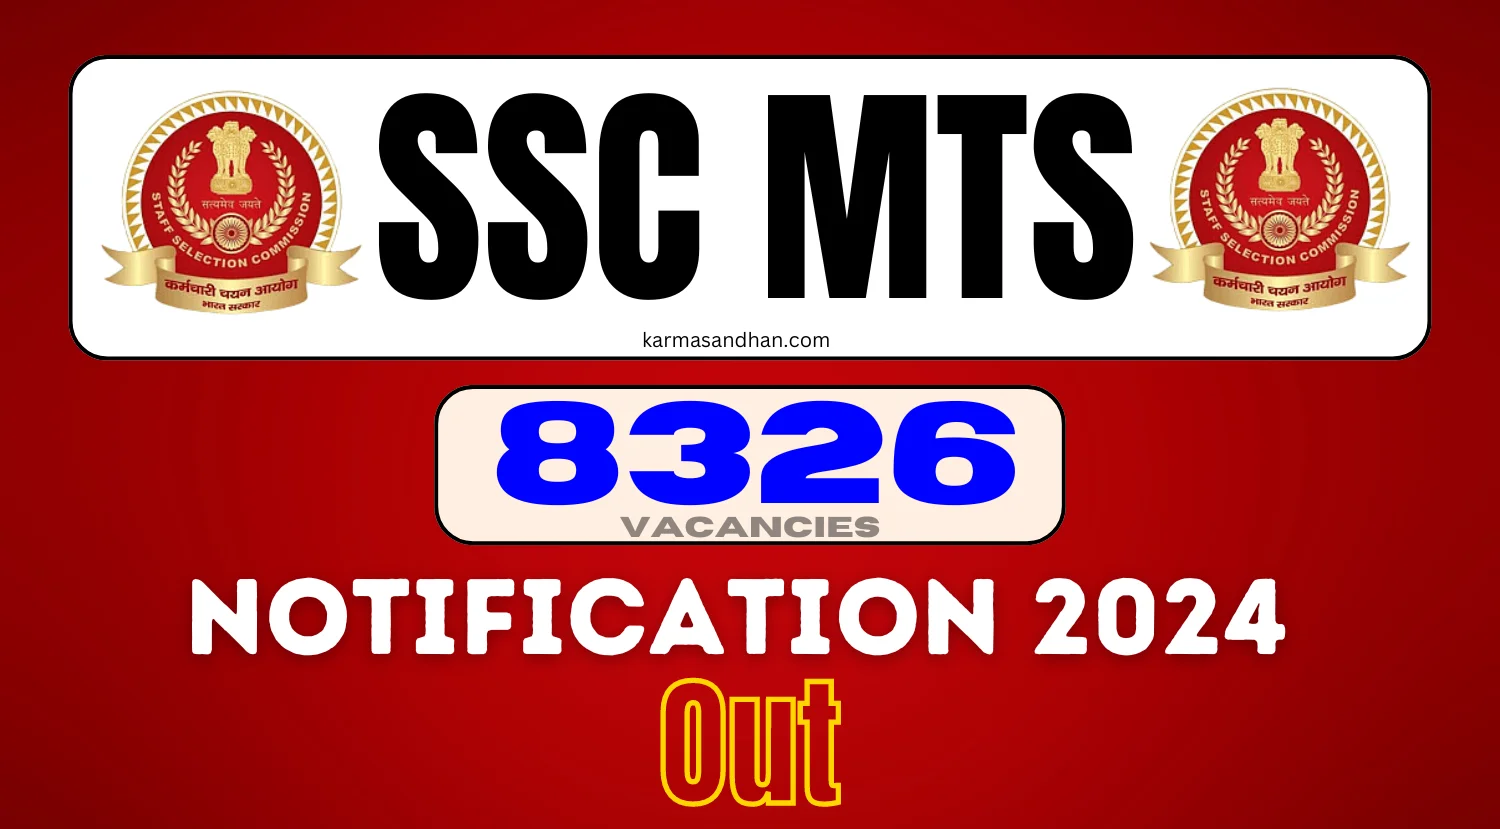 SSC MTS 2024 Notification for 8326 Vacancies Out, Apply Online, Check Exam Dates